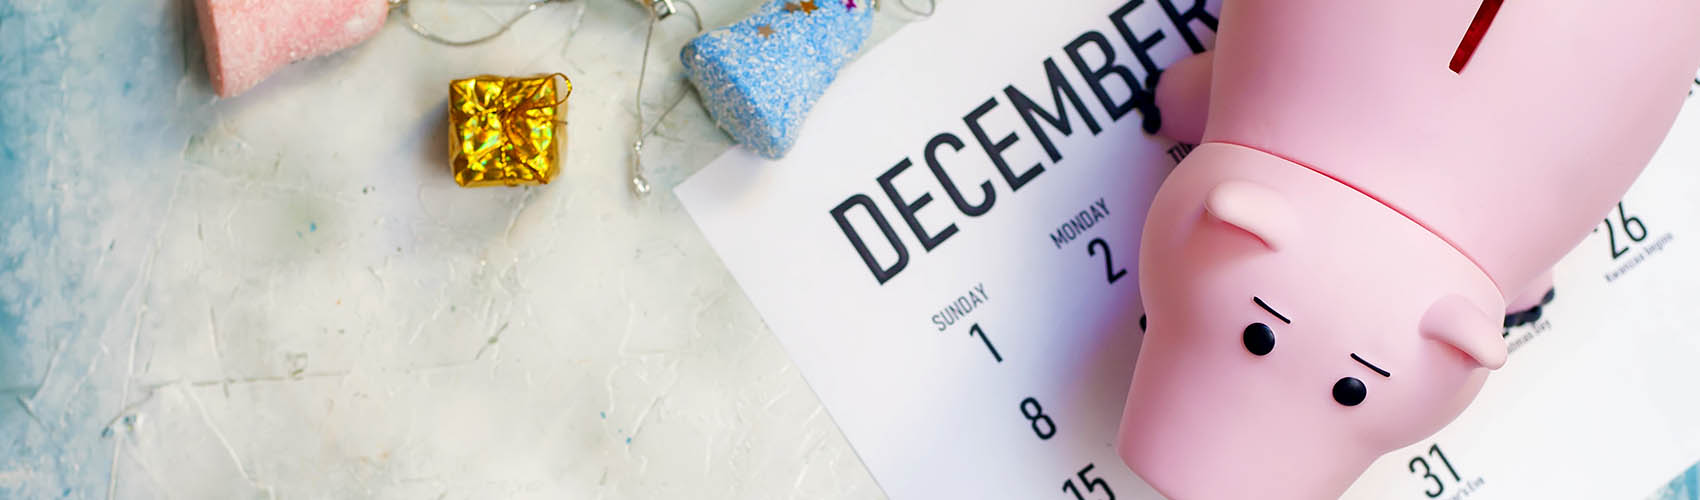 Making The Most of The Holiday Season Without Blowing Your Budget